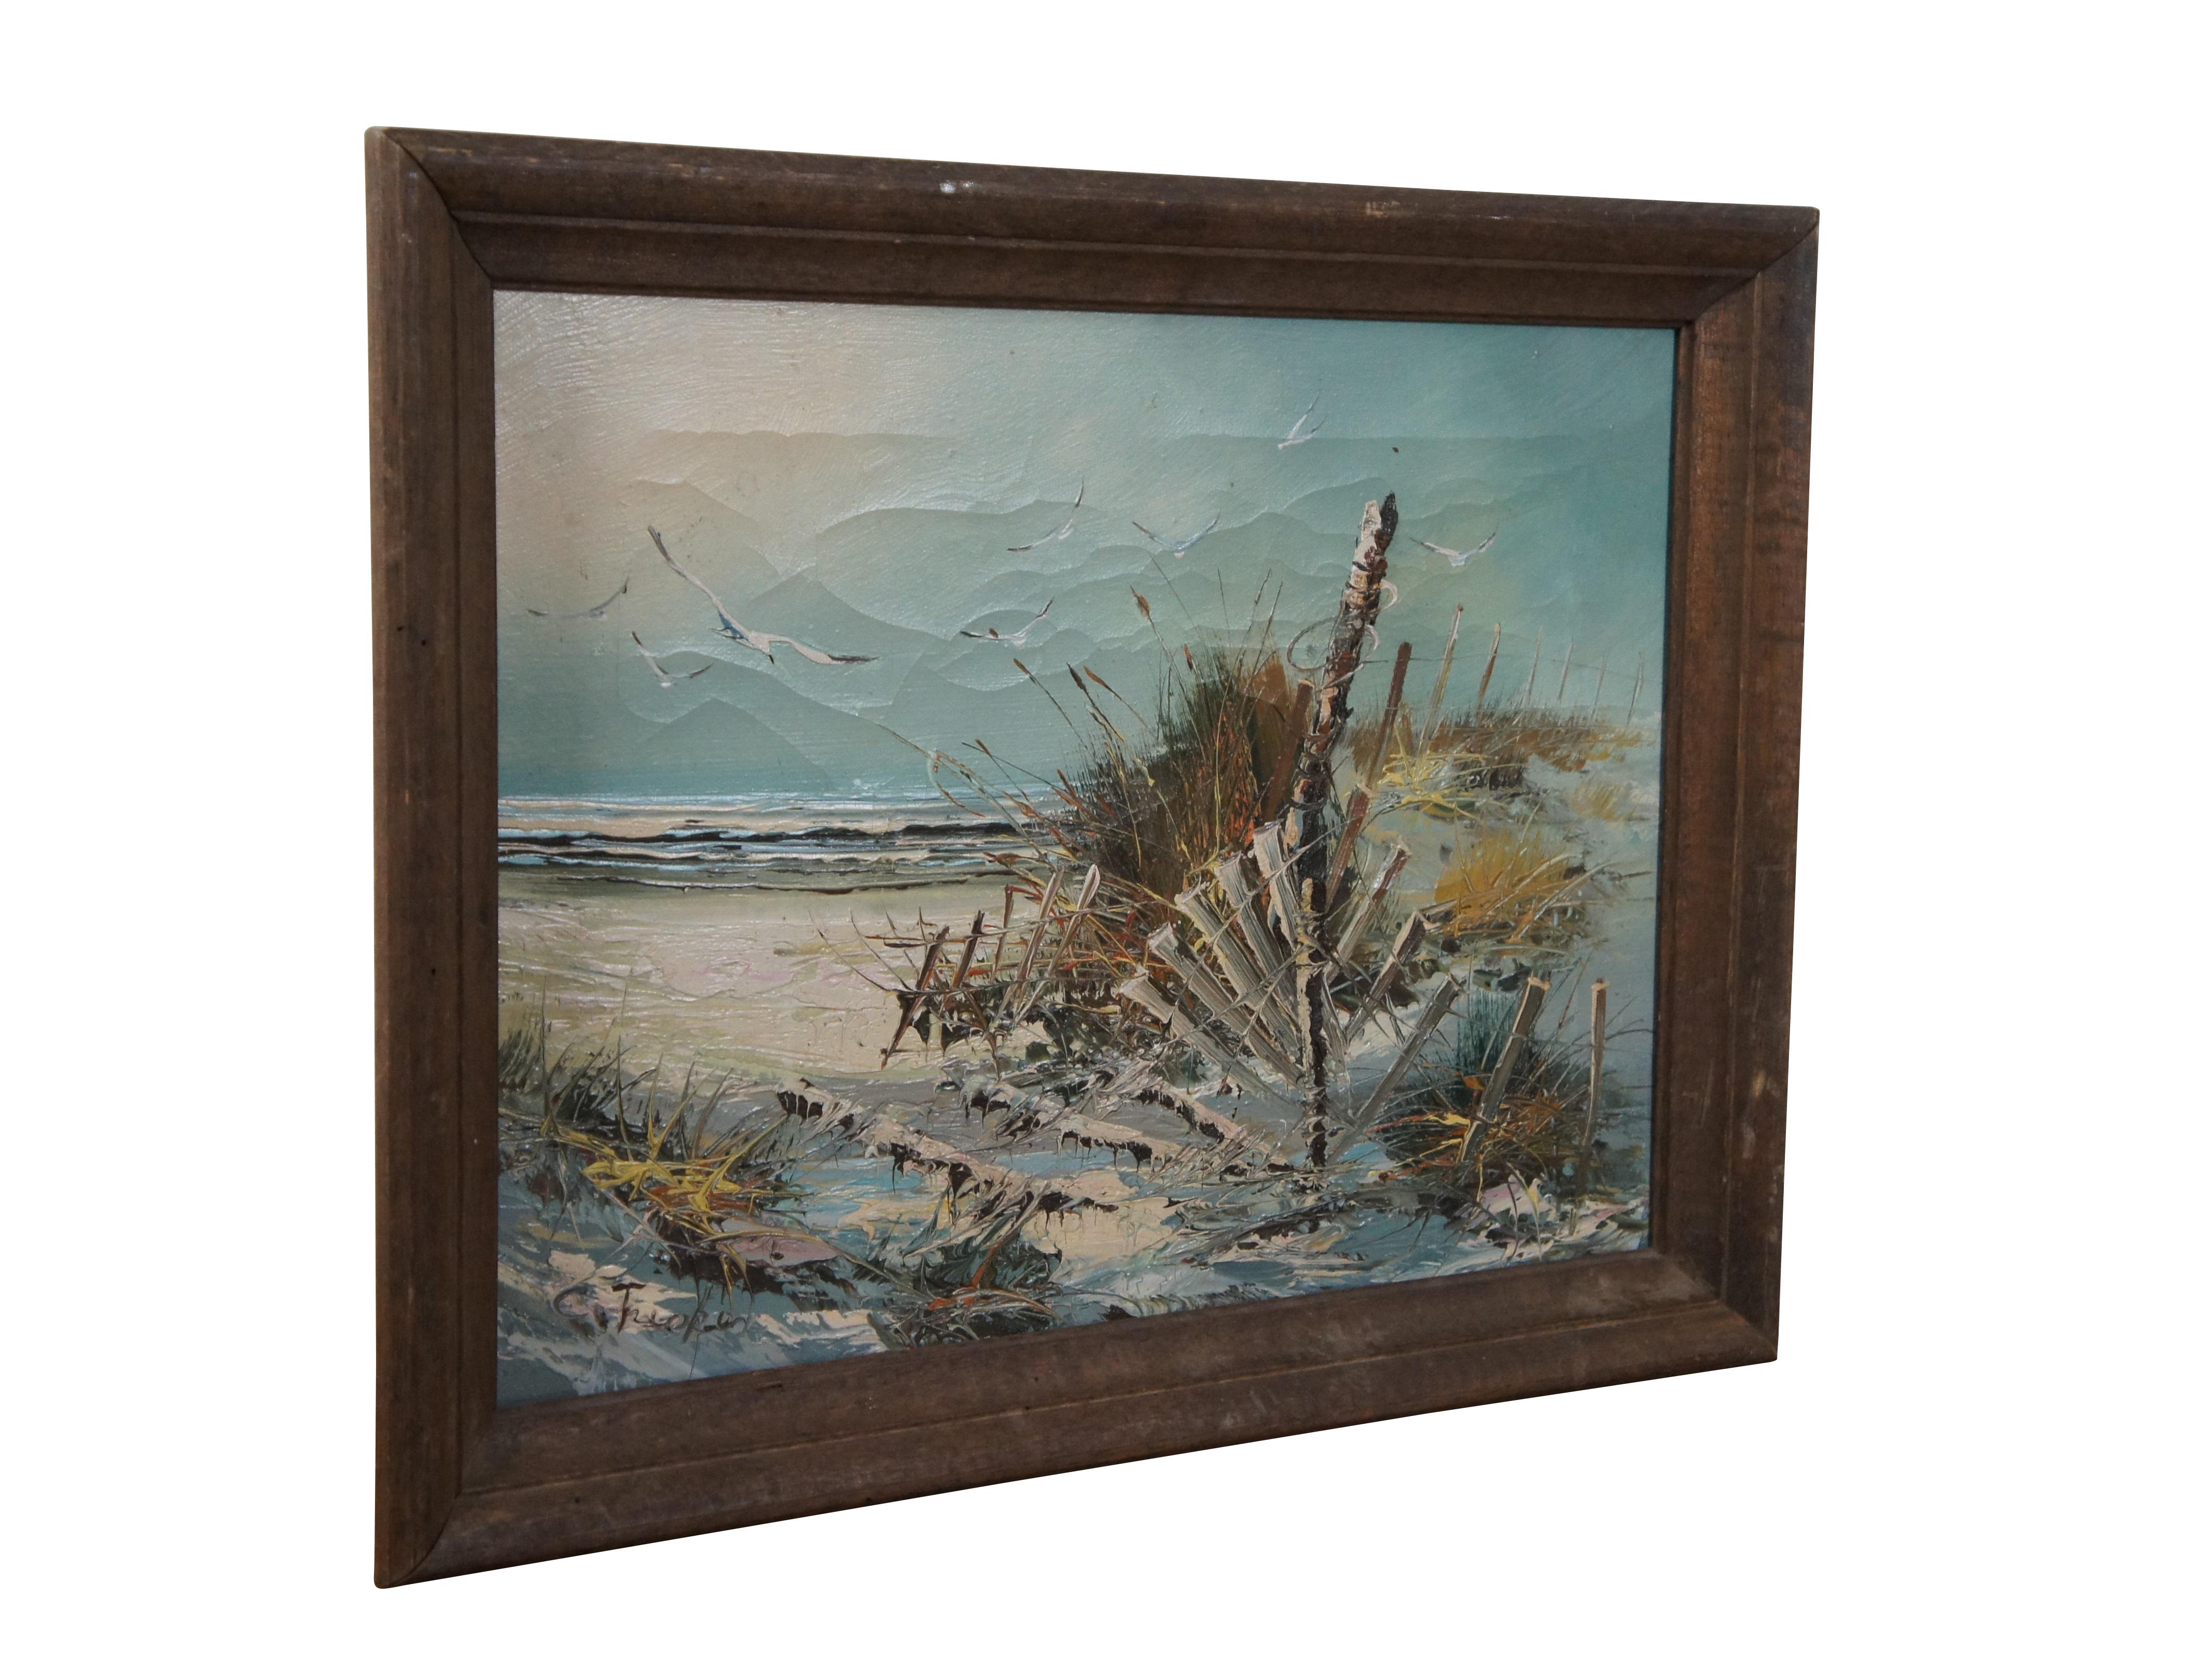 Vintage oil on canvas expressionist coastal landscape painting depicting a white sandy beach with a dilapidated fence perched on a grassy dune and seagulls flying above. Signed in lower left corner. Framed in a simple beveled wood